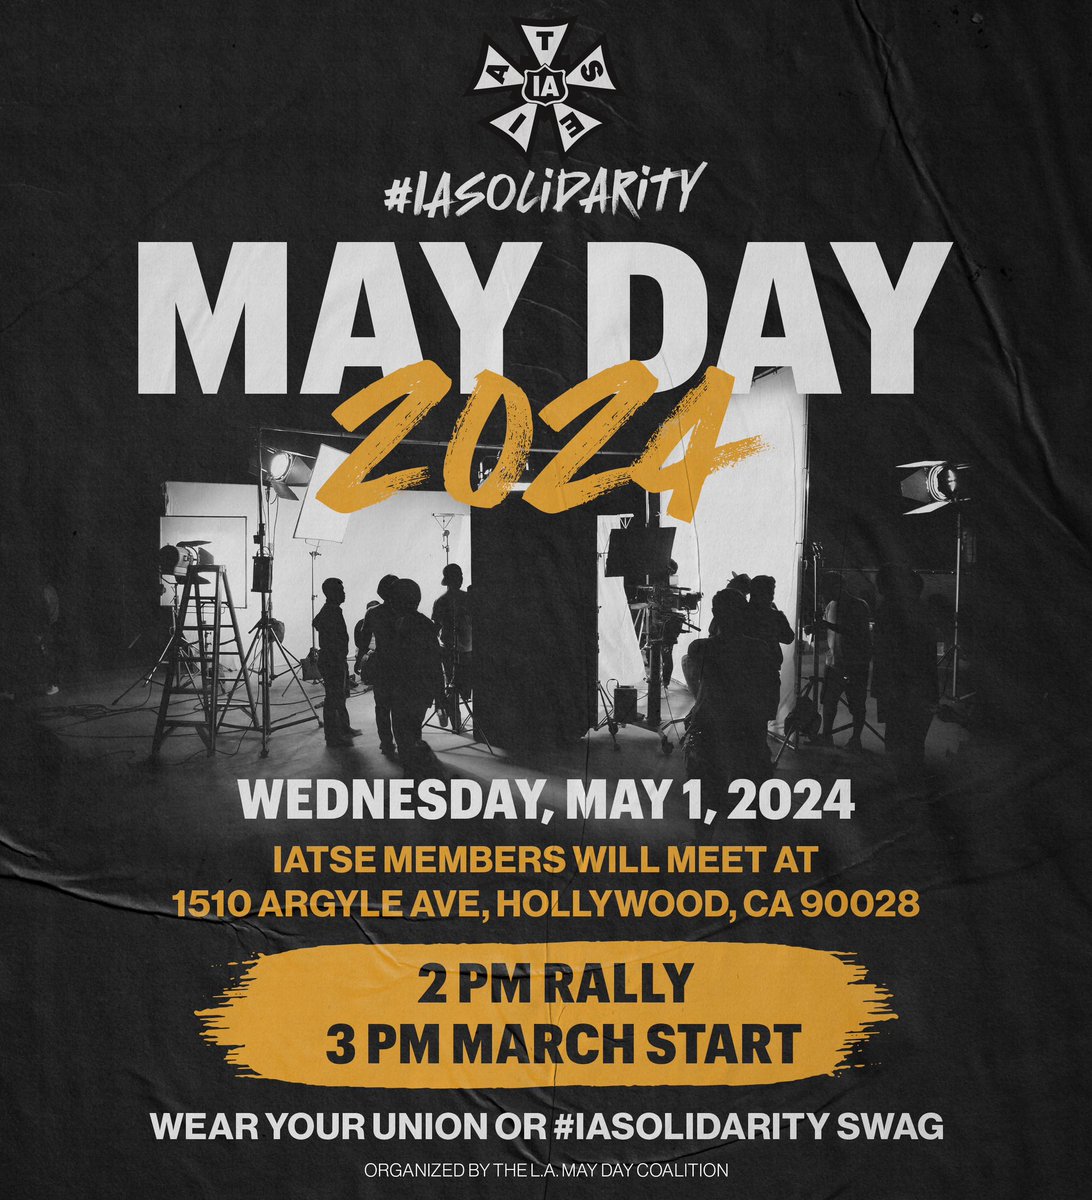 Let’s get down to business! We’re not done yet. Let’s keep the momentum… Join us along with the rest of the IATSE for a May Day solidarity rally. Wear your union swag!